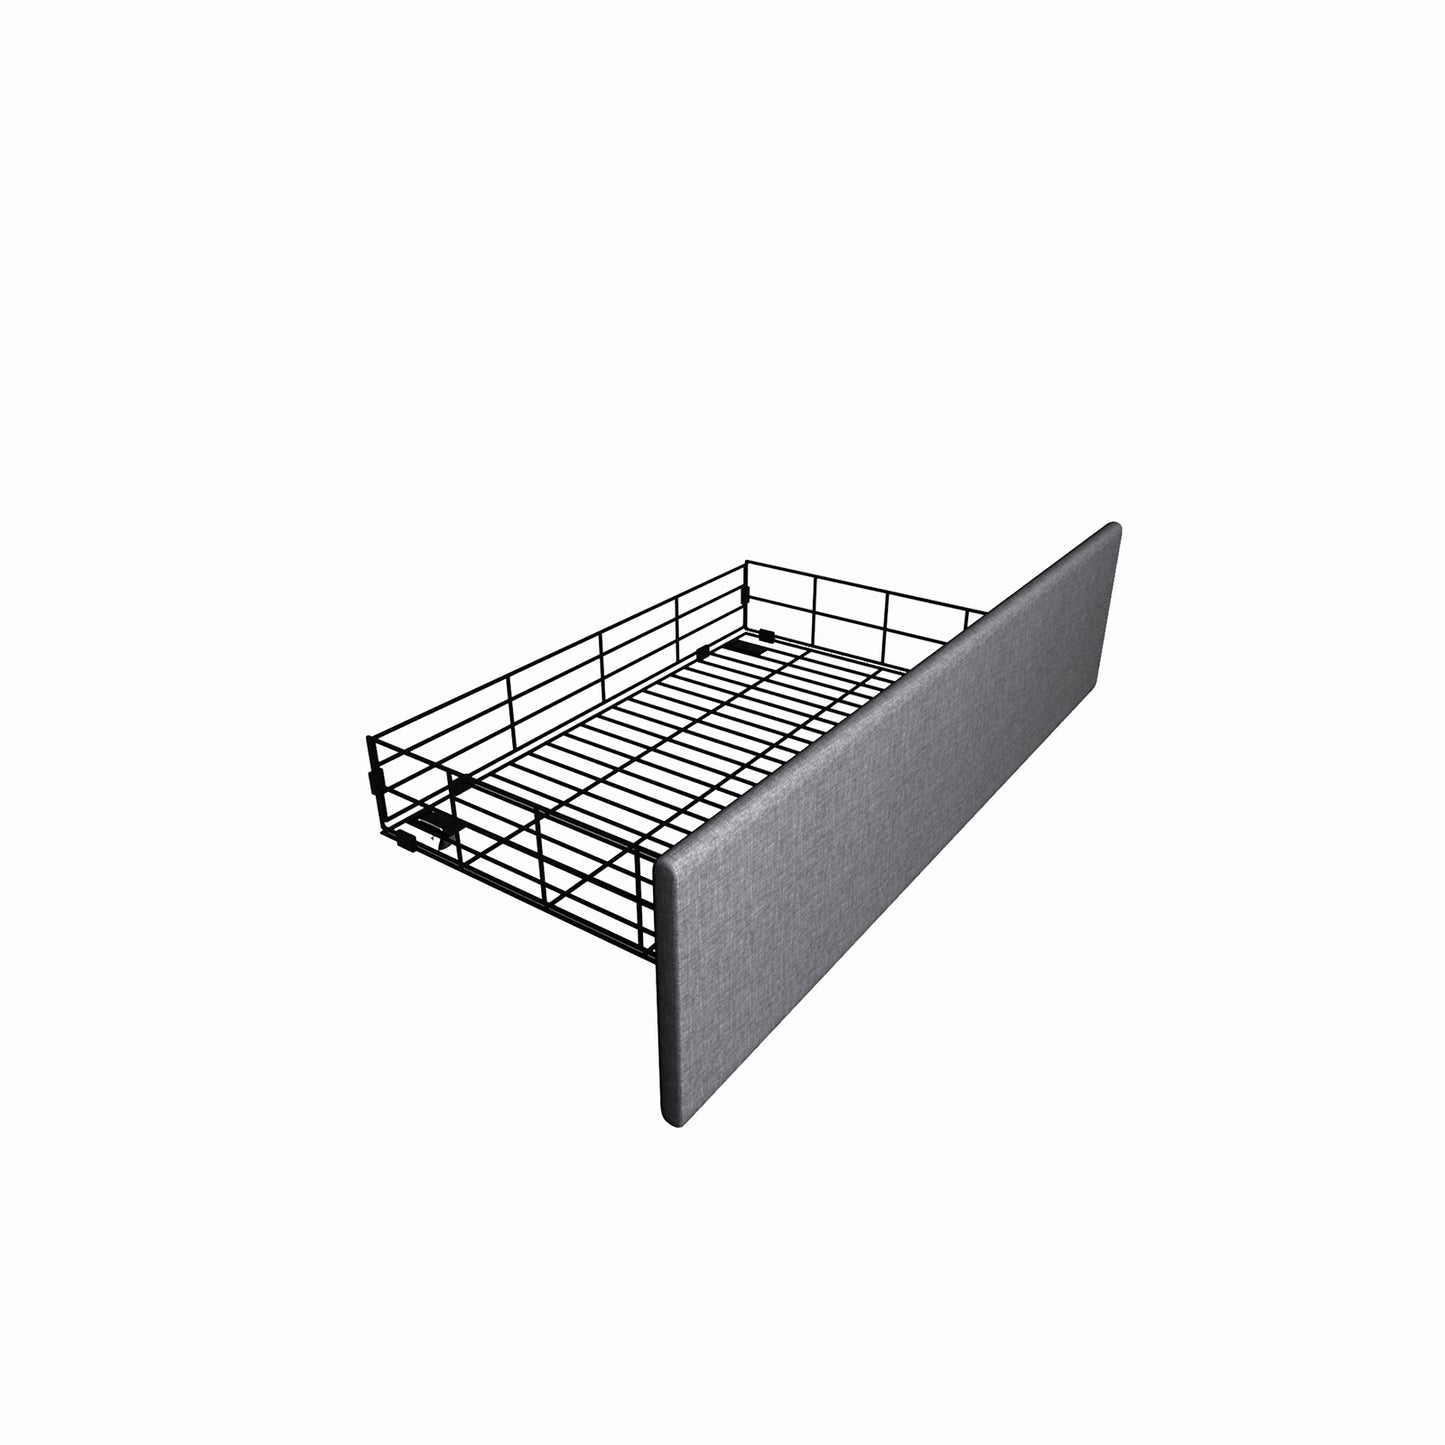 A single drawer for the integrated storage in light grey for the albion king sized bed frame on a white background